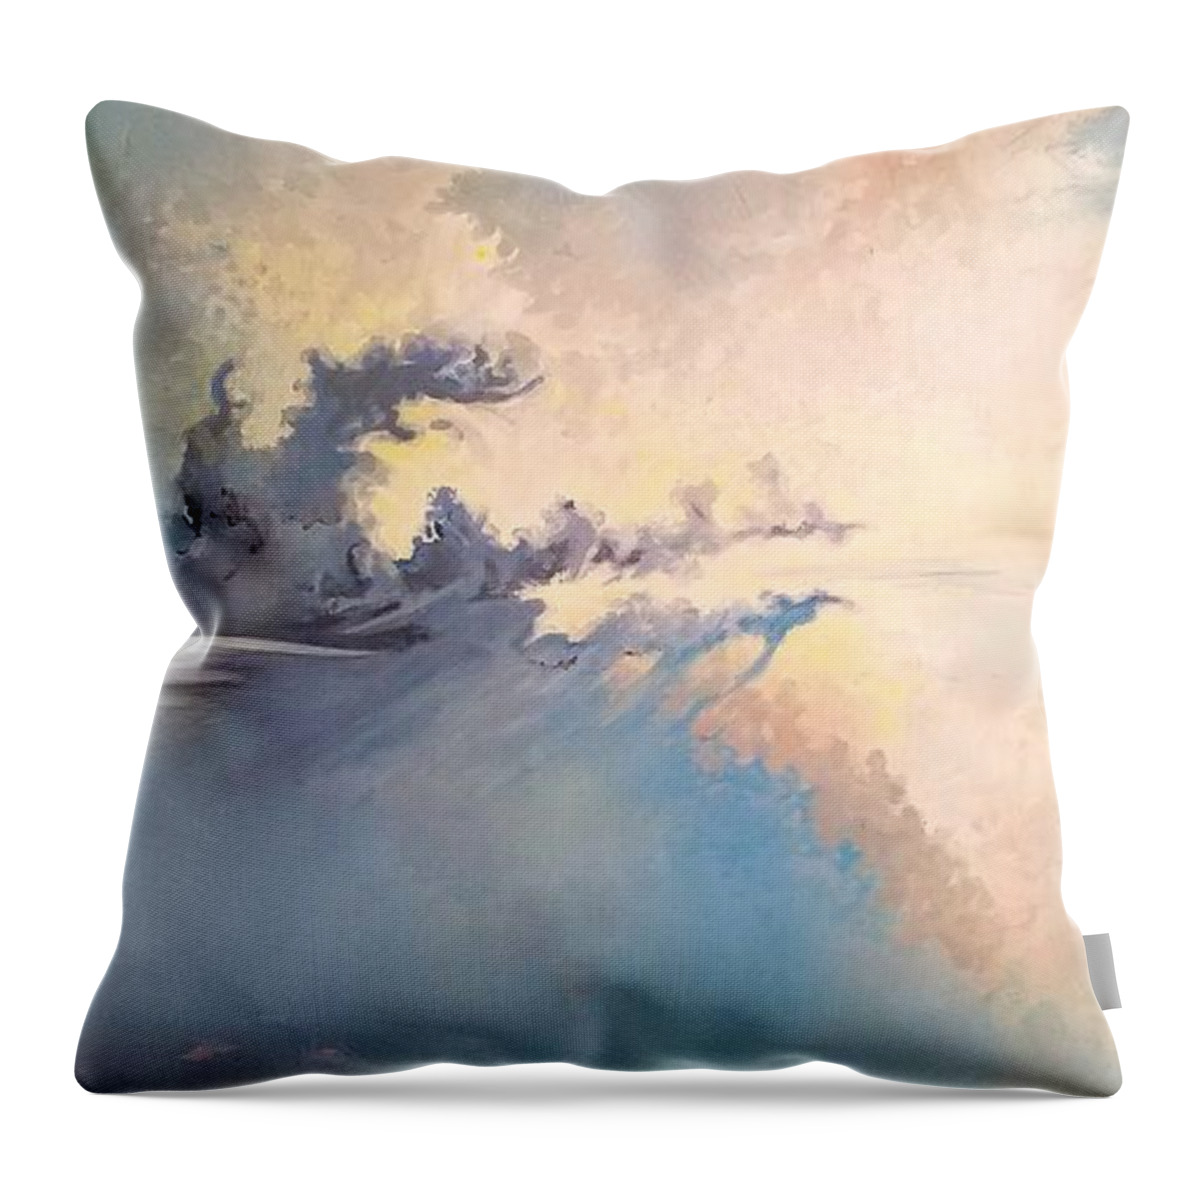 Winter Throw Pillow featuring the painting Winter Cloud Dragon by Merana Cadorette